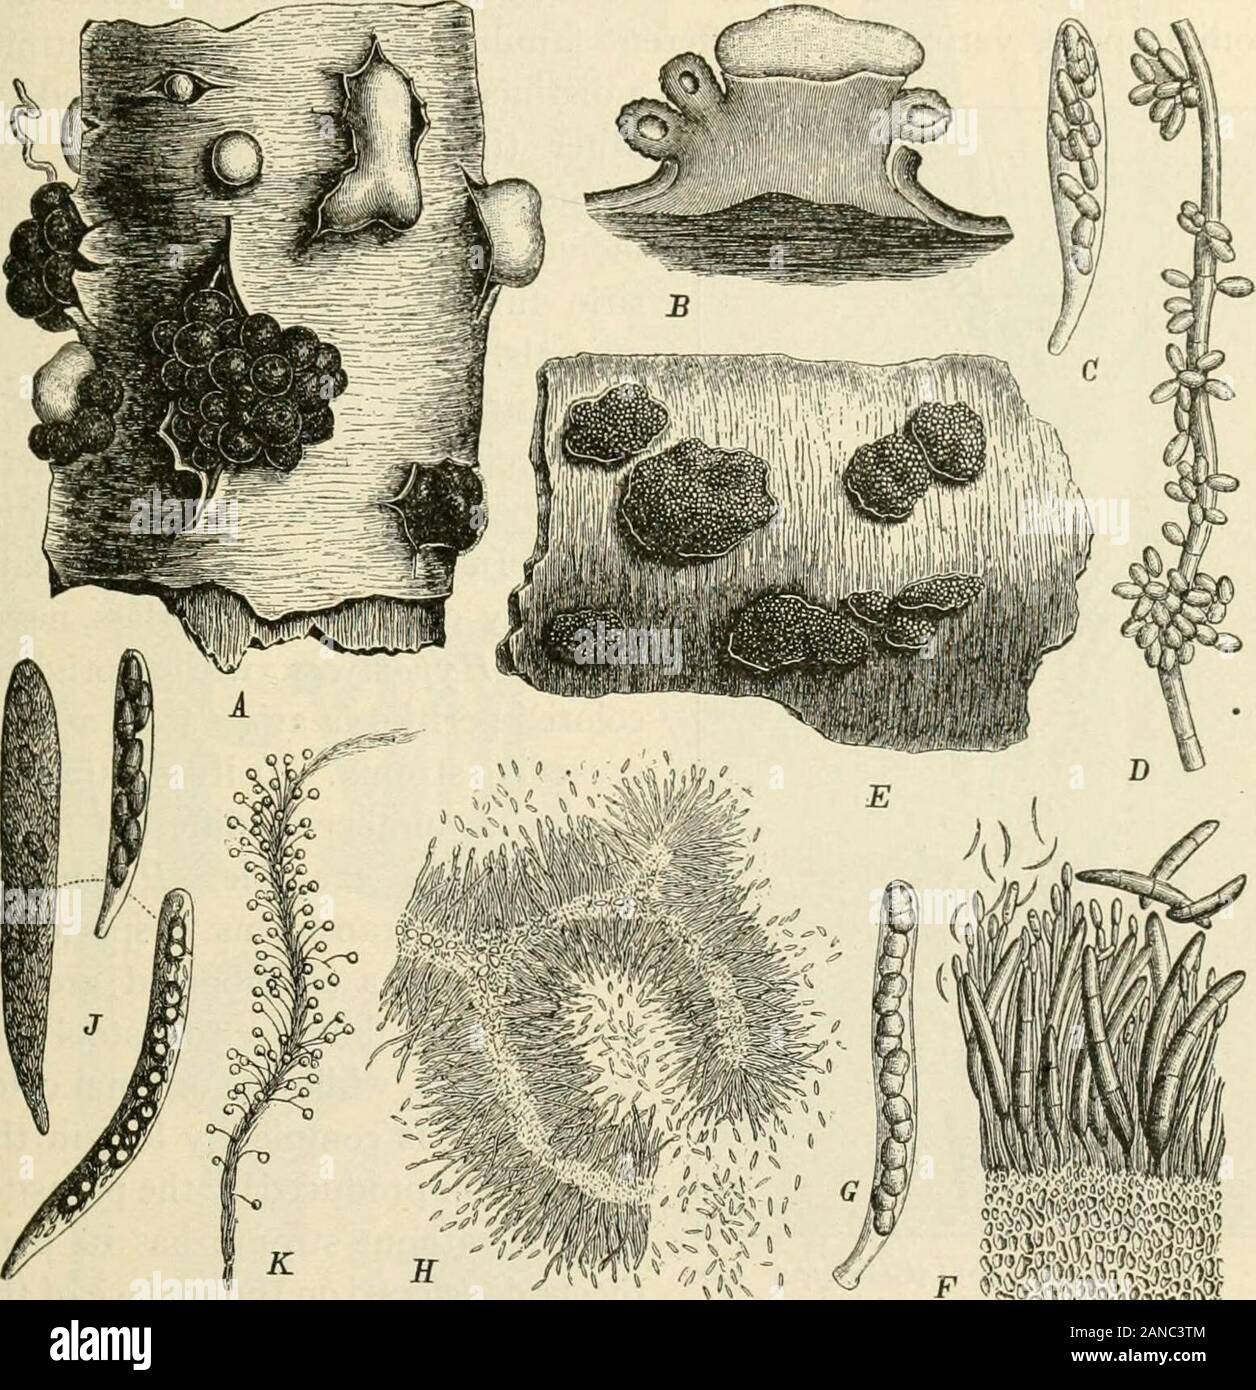 A text-book of mycology and plant pathology . , or on the ground where the droppings of the aphis in the formof honey-dew have collected. Its mycelium is greenish-black, much-branched, rigid, septate and the hyphse are glued together by anabundant mucilaginous substance forming a loose spongy mass, bearingan abundance of pyriform, coriaceous perithecia, which enclose narrow,thick-walled, eight-spored asci. Elongate pycnidia and perithecia arealso frequently seen. Family 3. Microthyriace^.—The mycelium of the fungi of thisfamily is superficial and dark in color. The perithecia are superficial 1 Stock Photo